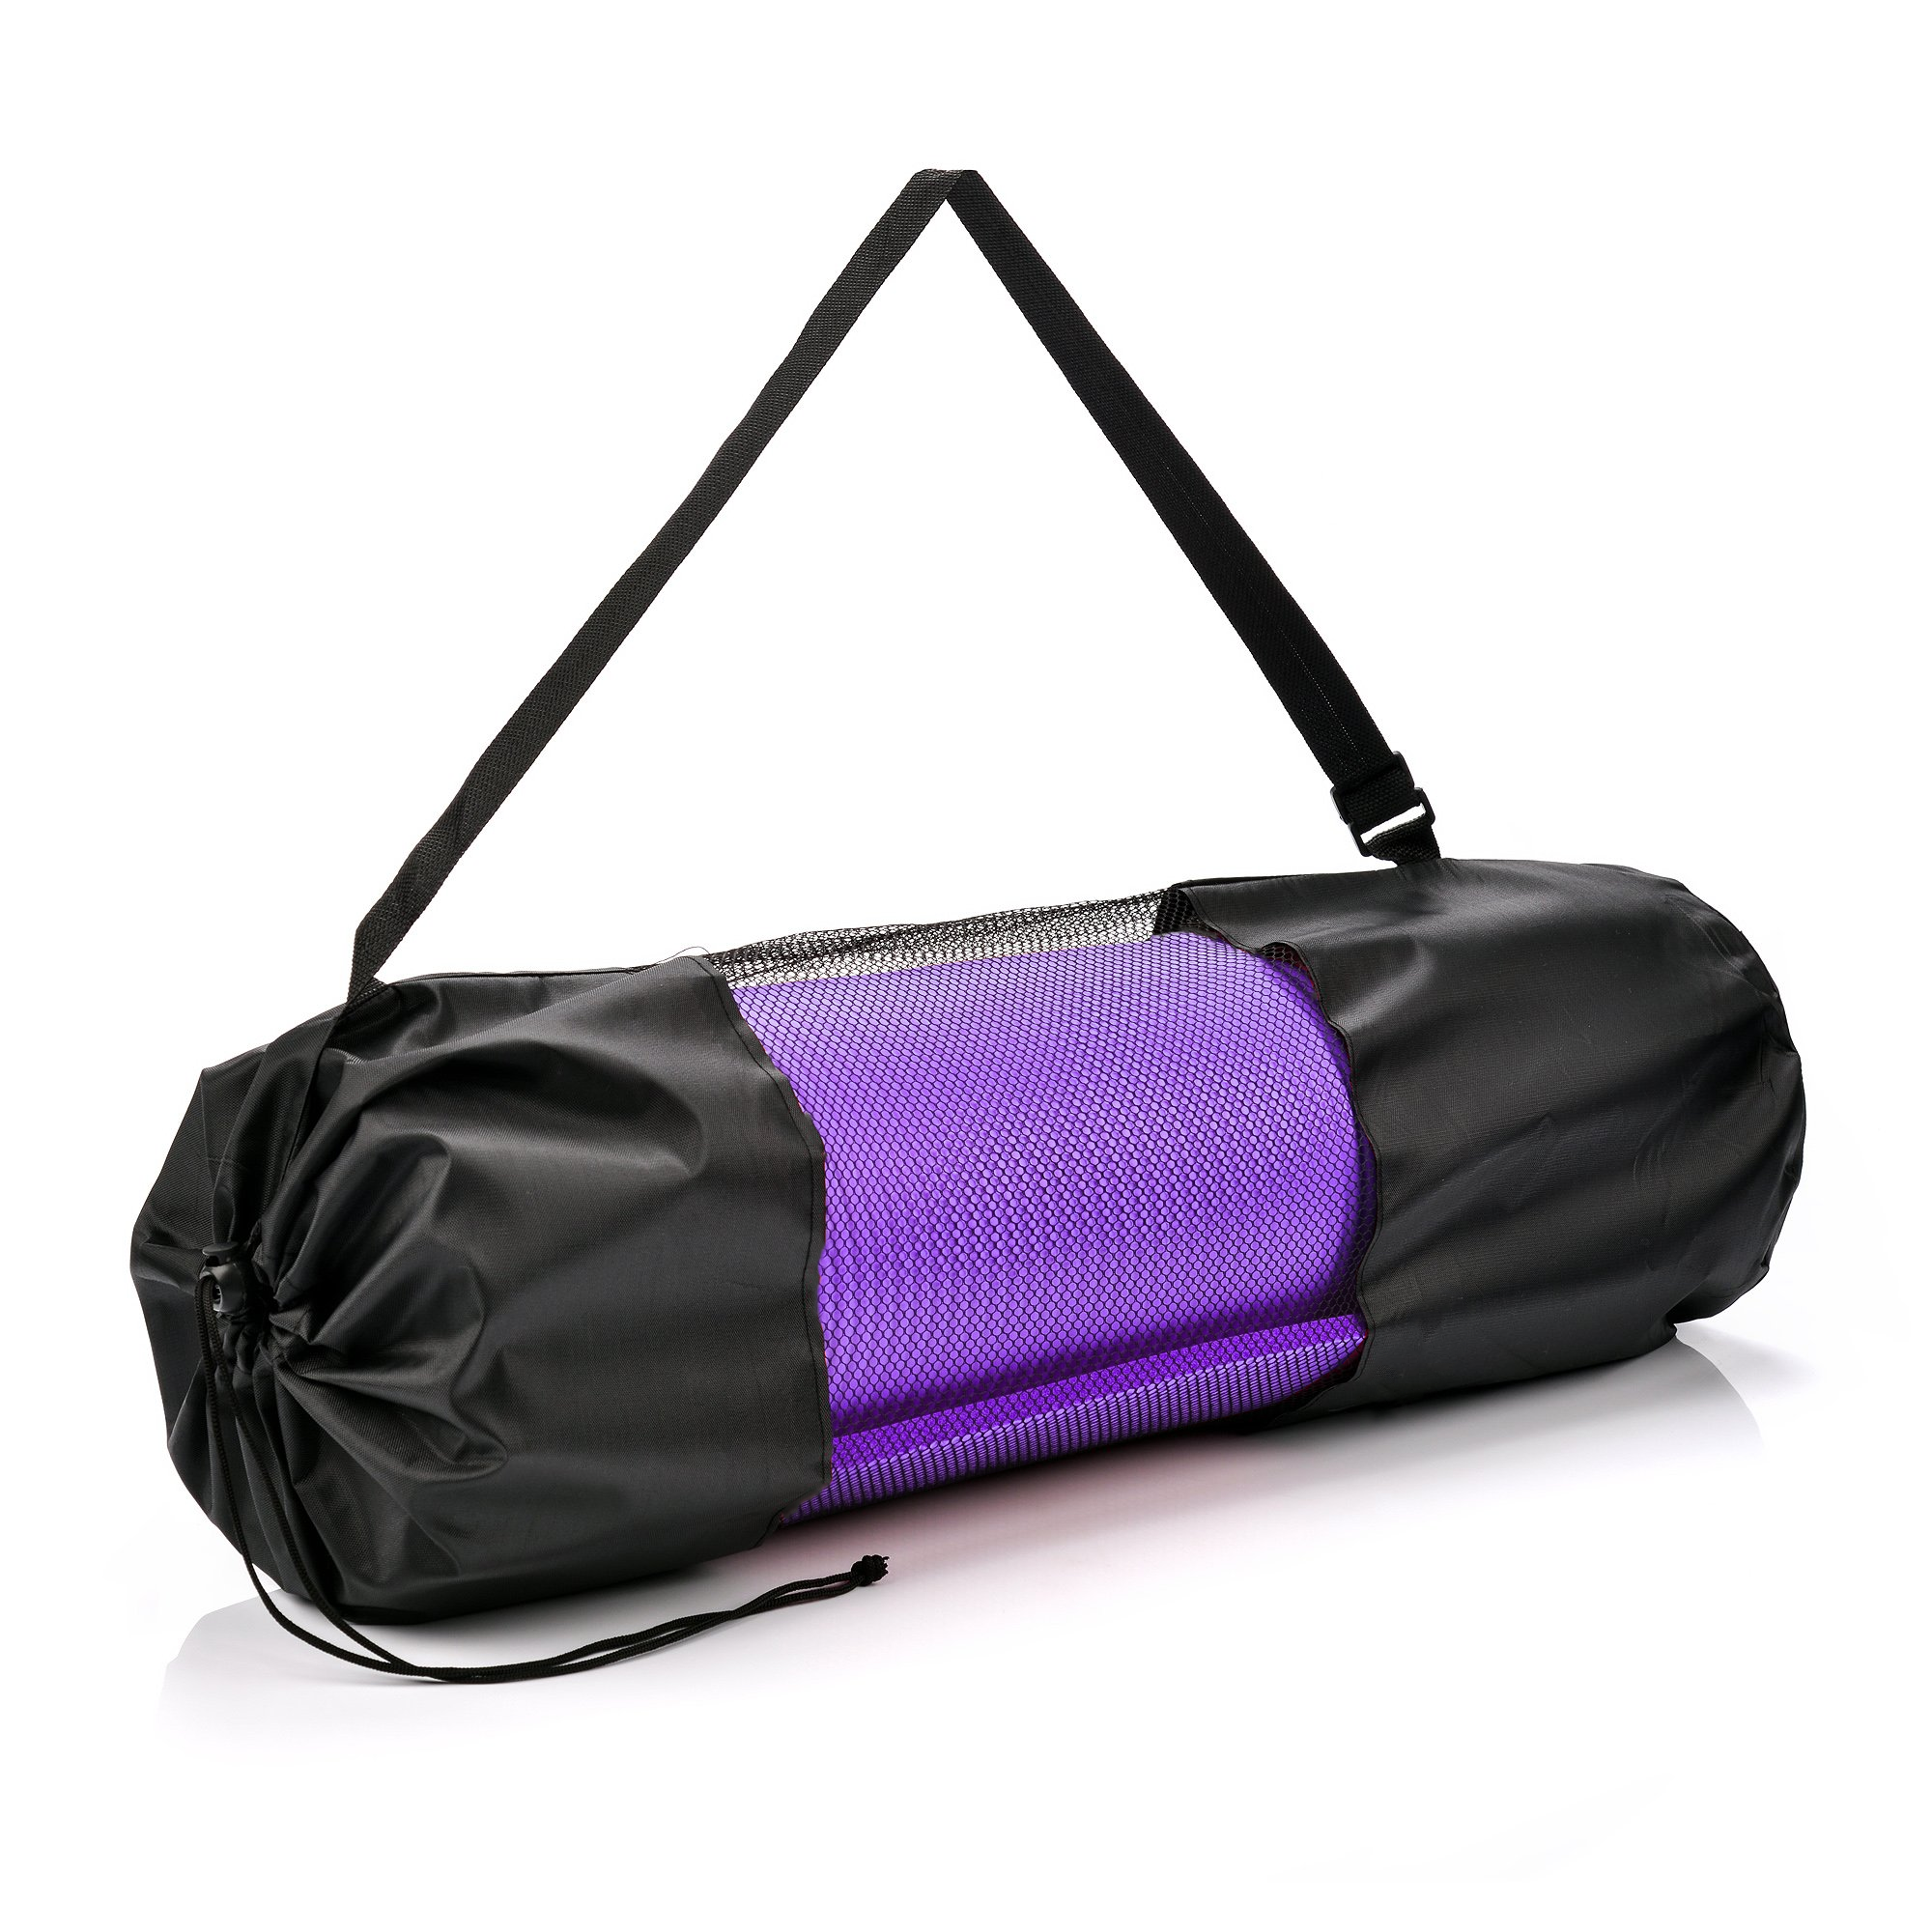 1pc Adjustable Thick Yoga Mat Carrier Strap, Stretching Band For Large Mats  - Illusory Colorful Sport Bag Gym Bag Yoga Mat Bag Yoga Bag Storage Bag for Yoga  Yoga Mat Strap Black